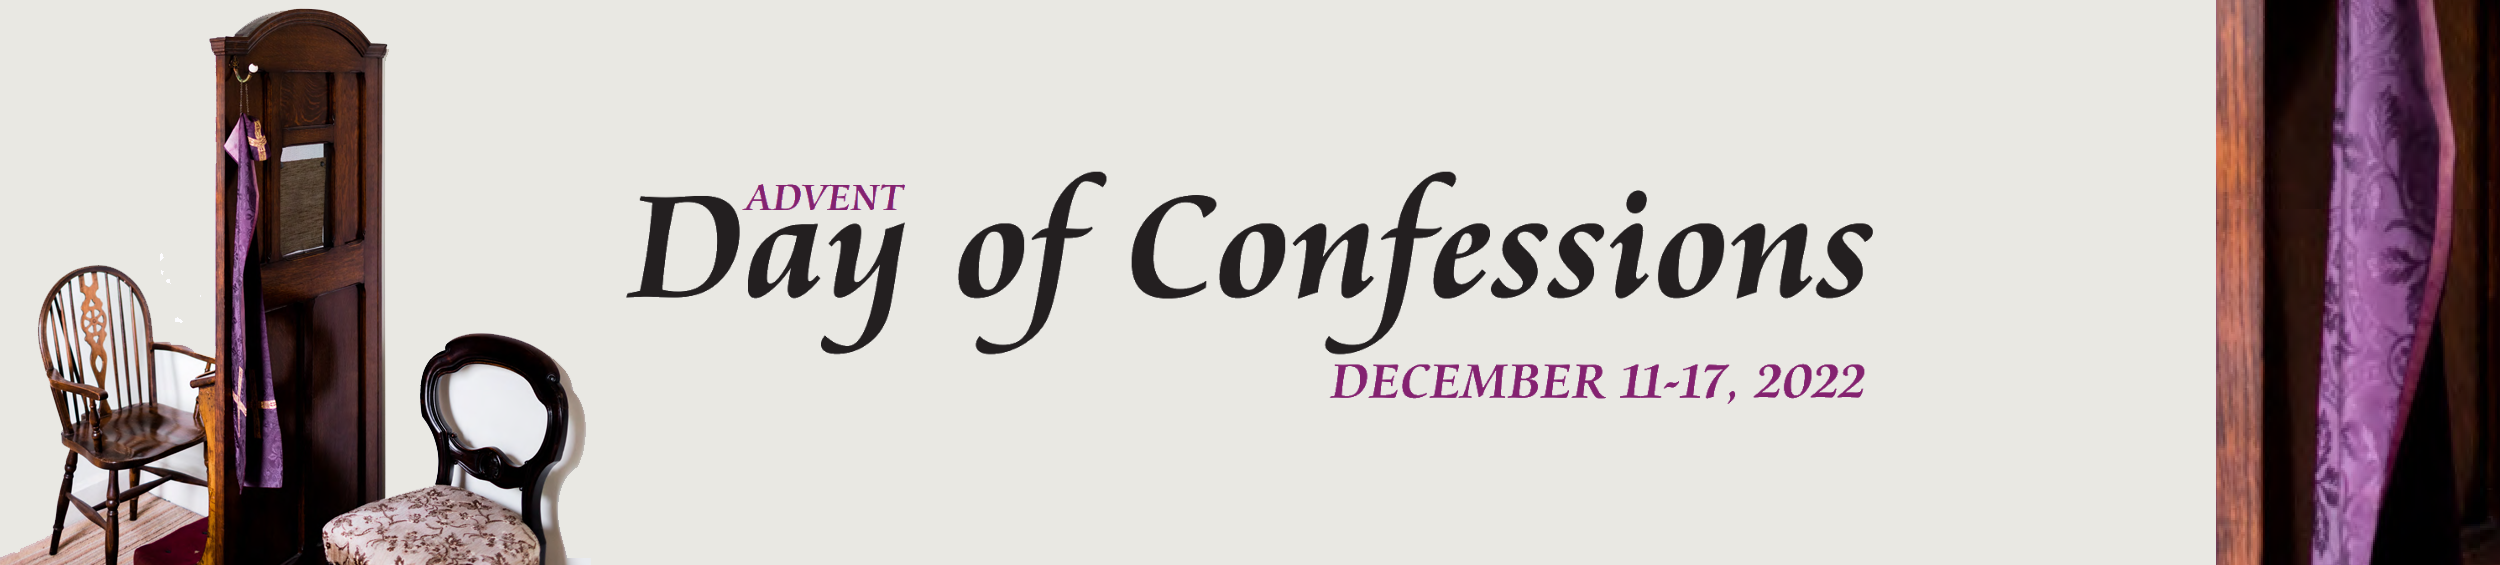 Banner for Day of Confessions - Advent 2022